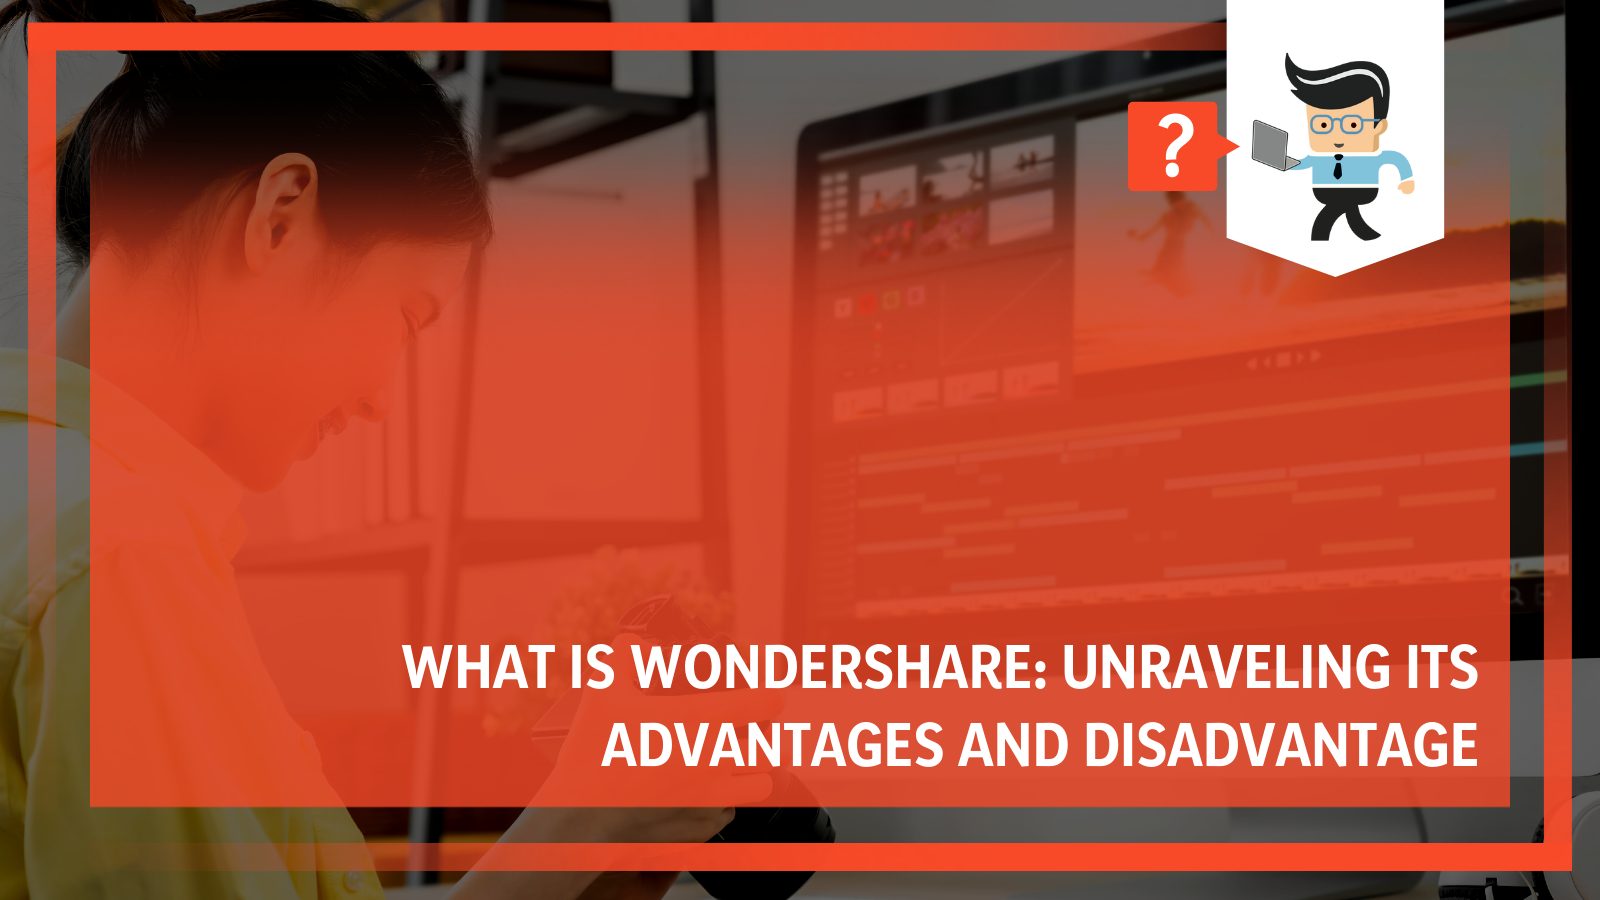 What is wondershare unraveling its advantages and disadvantages x